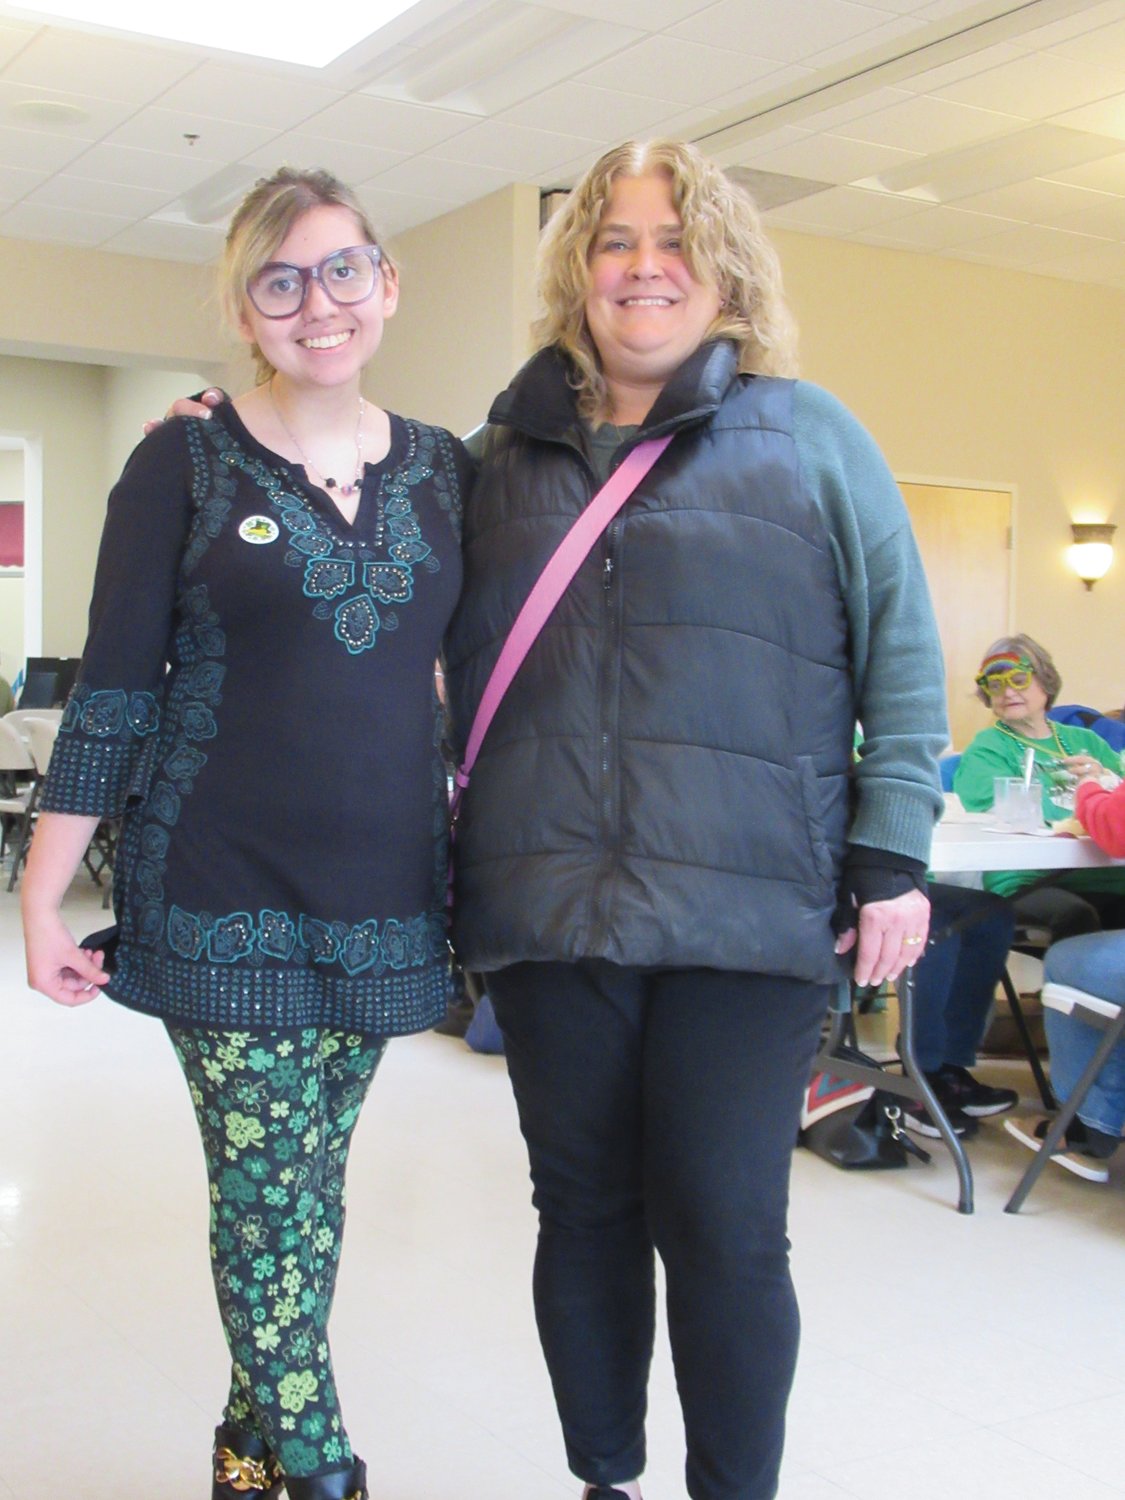 COACHES CORNER: Super JHS vocalist Katie Rodriguez and her teacher Julie Forte were in the spotlight at last week’s St. Patrick’s Day Party.